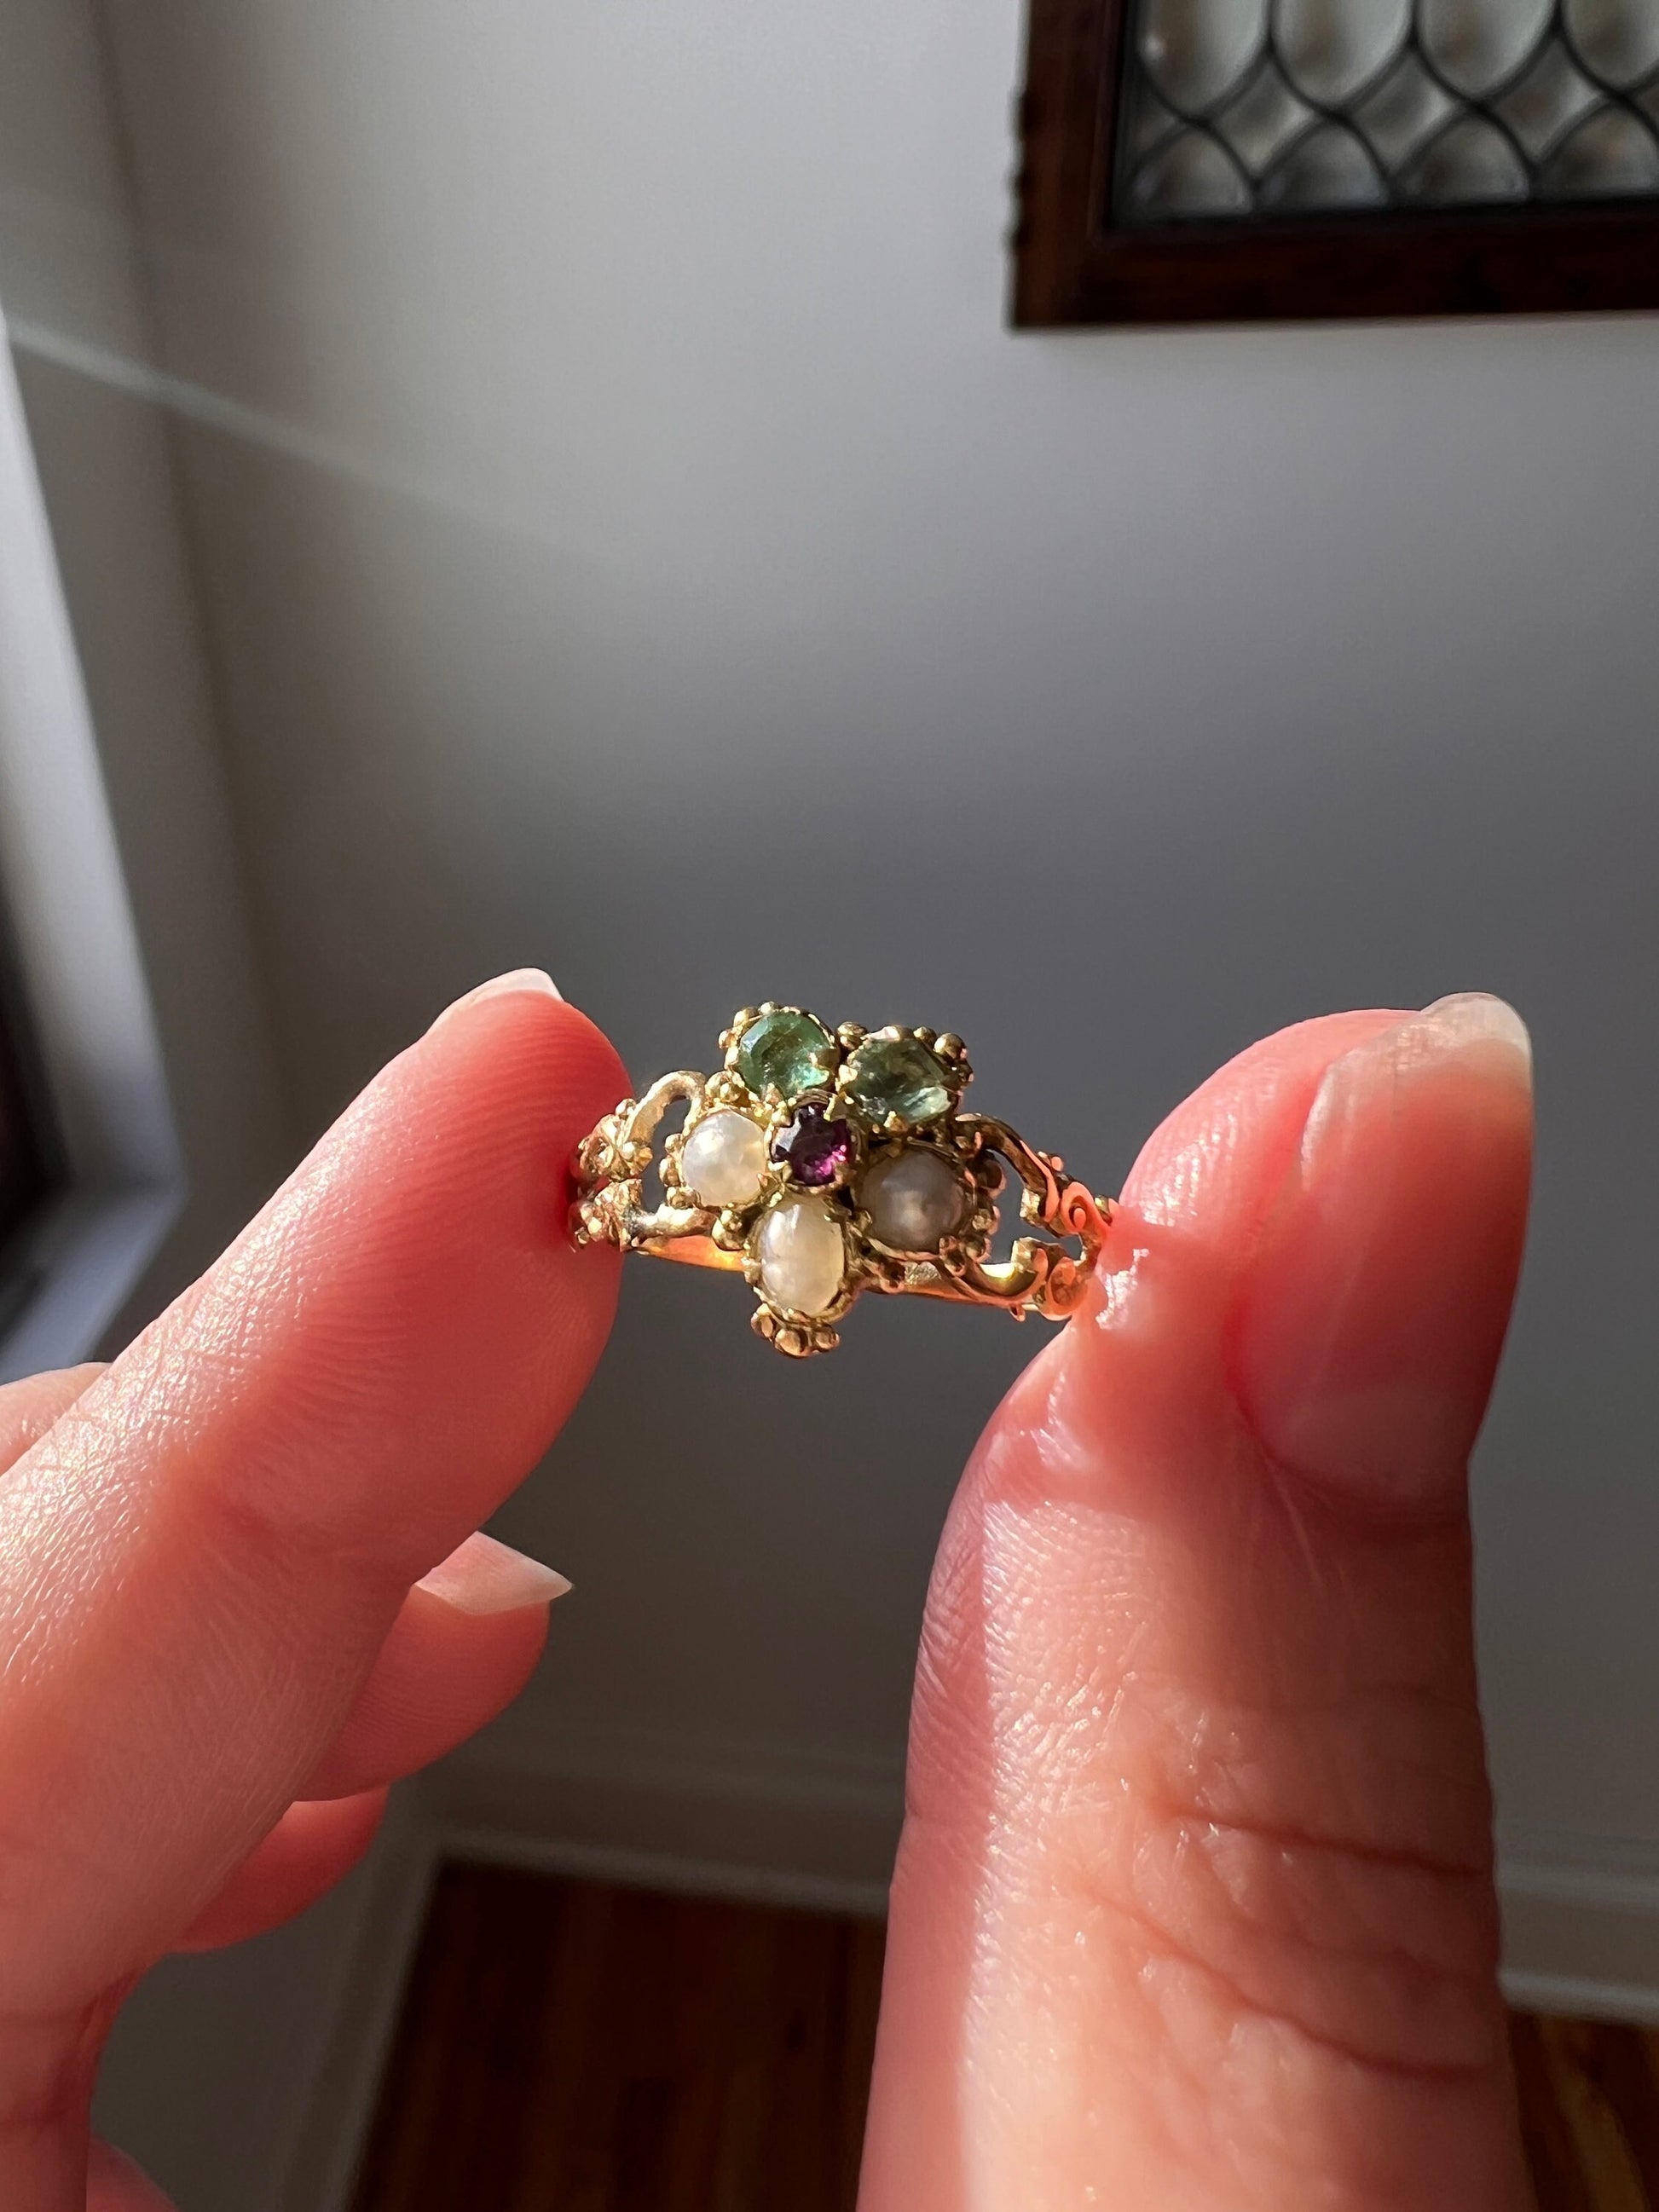 PANSY Green EMERALD Pearl RUBY Victorian to Georgian Antique Figural Floral Ring 15k Gold Flower Love Romantic Gift Stacker Not 14k Ornate